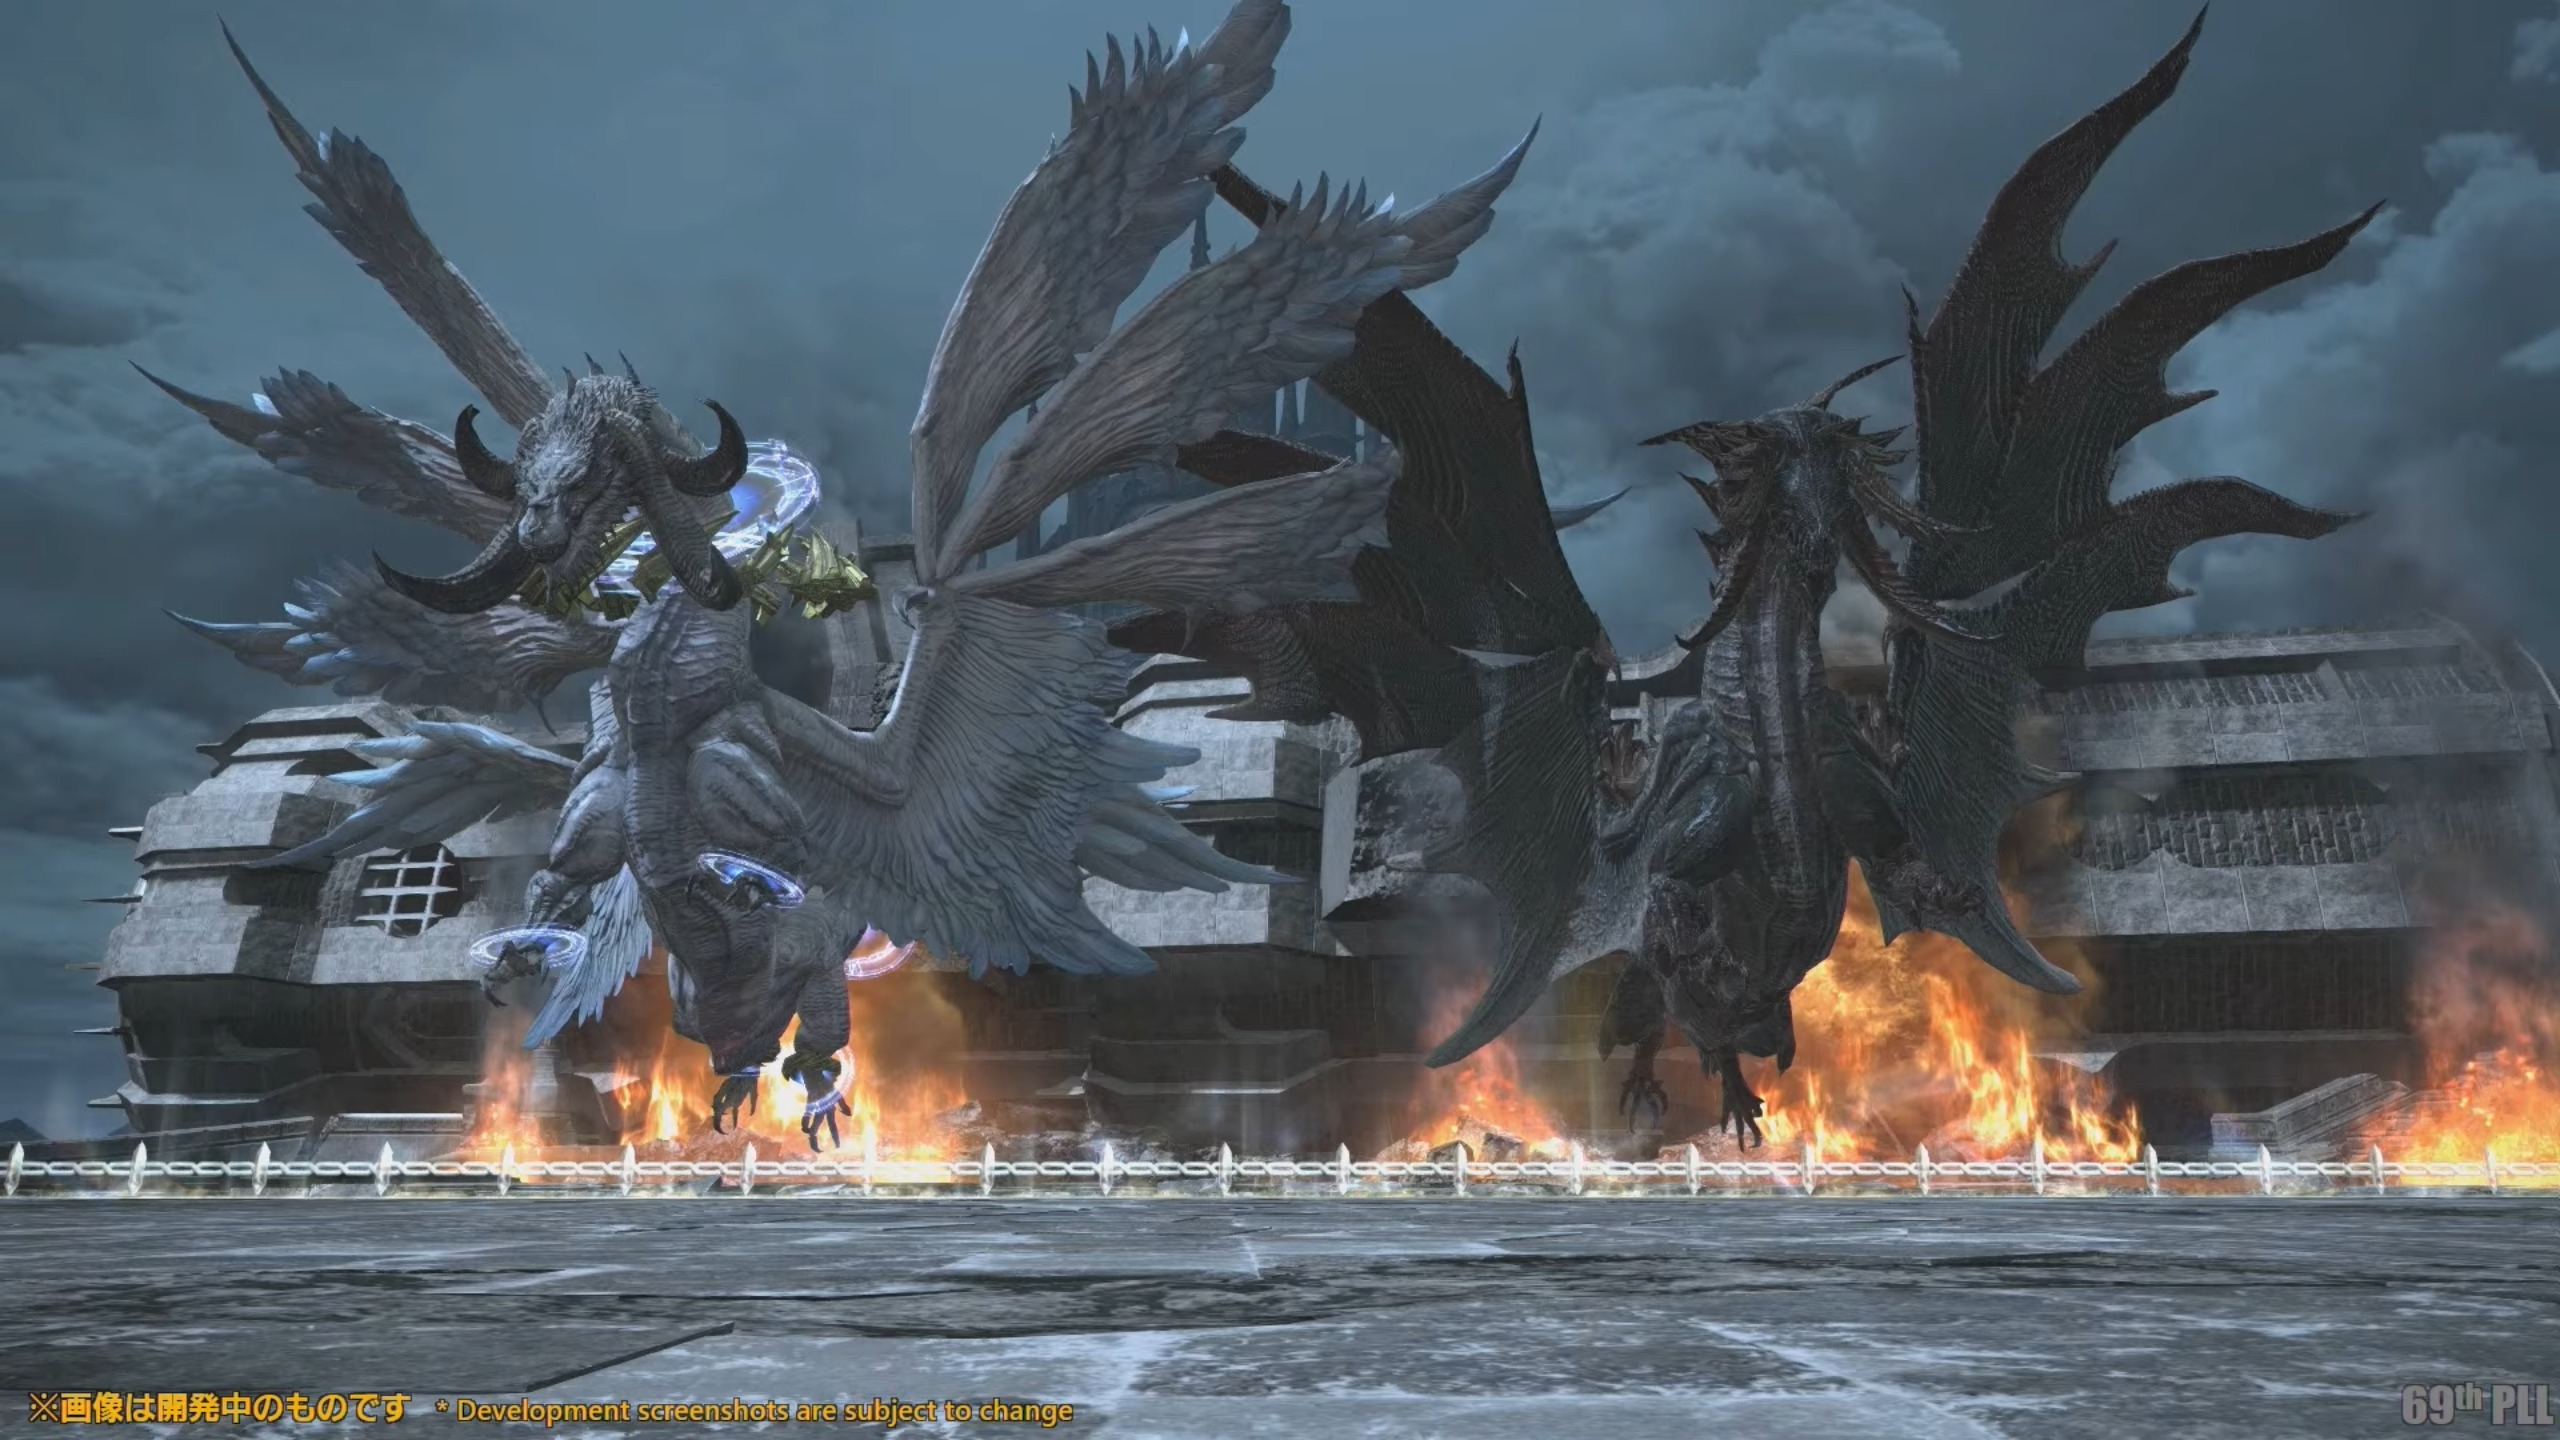 Final Fantasy XIV Reveals Tons of Details & Screenshots About Update 6.1 “Newfound Adventure” & More